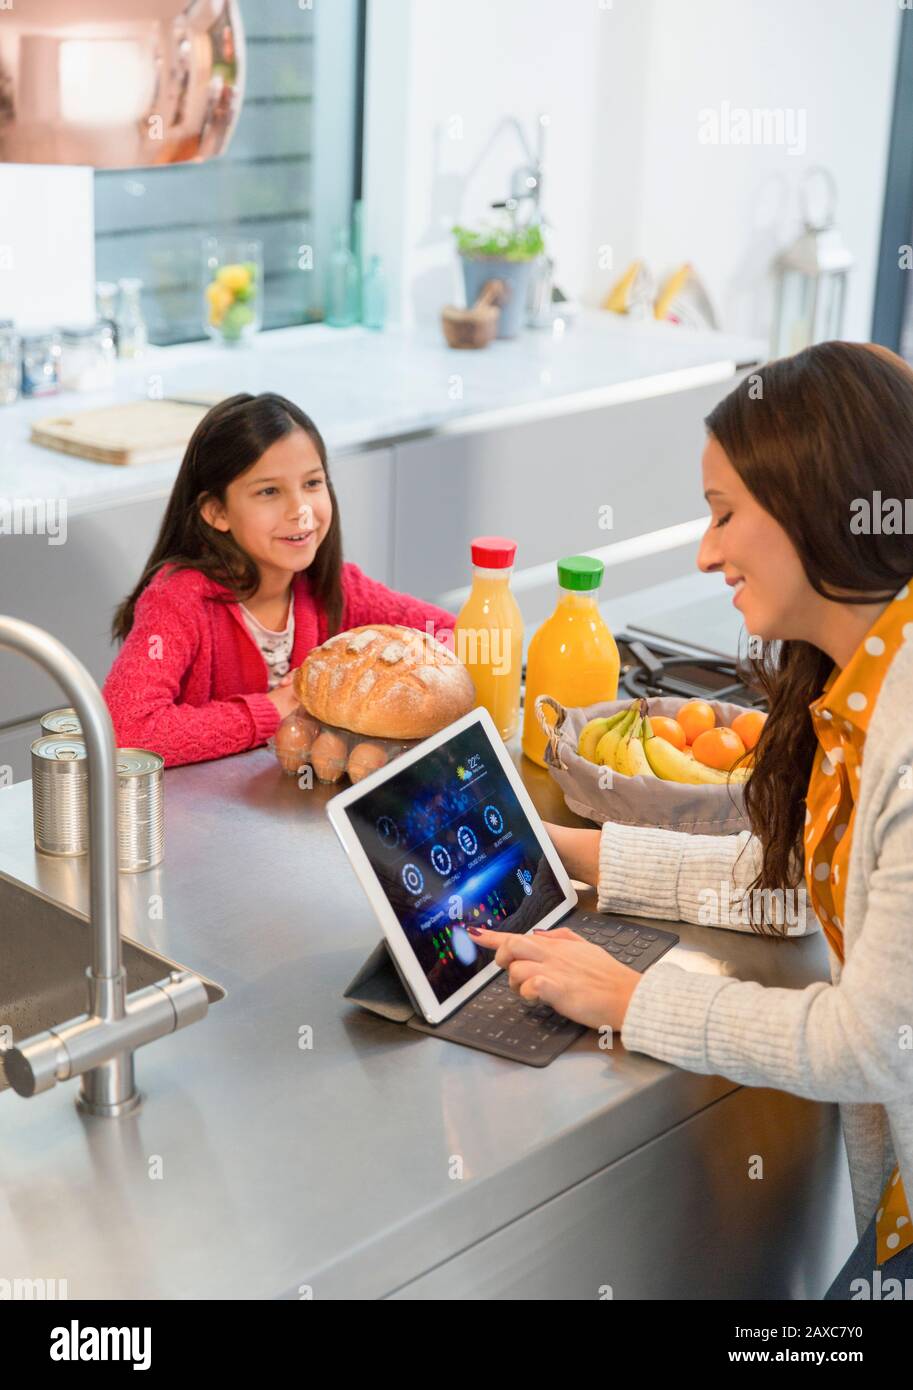 Daughter watching mother using digital tablet in kitchen Stock Photo